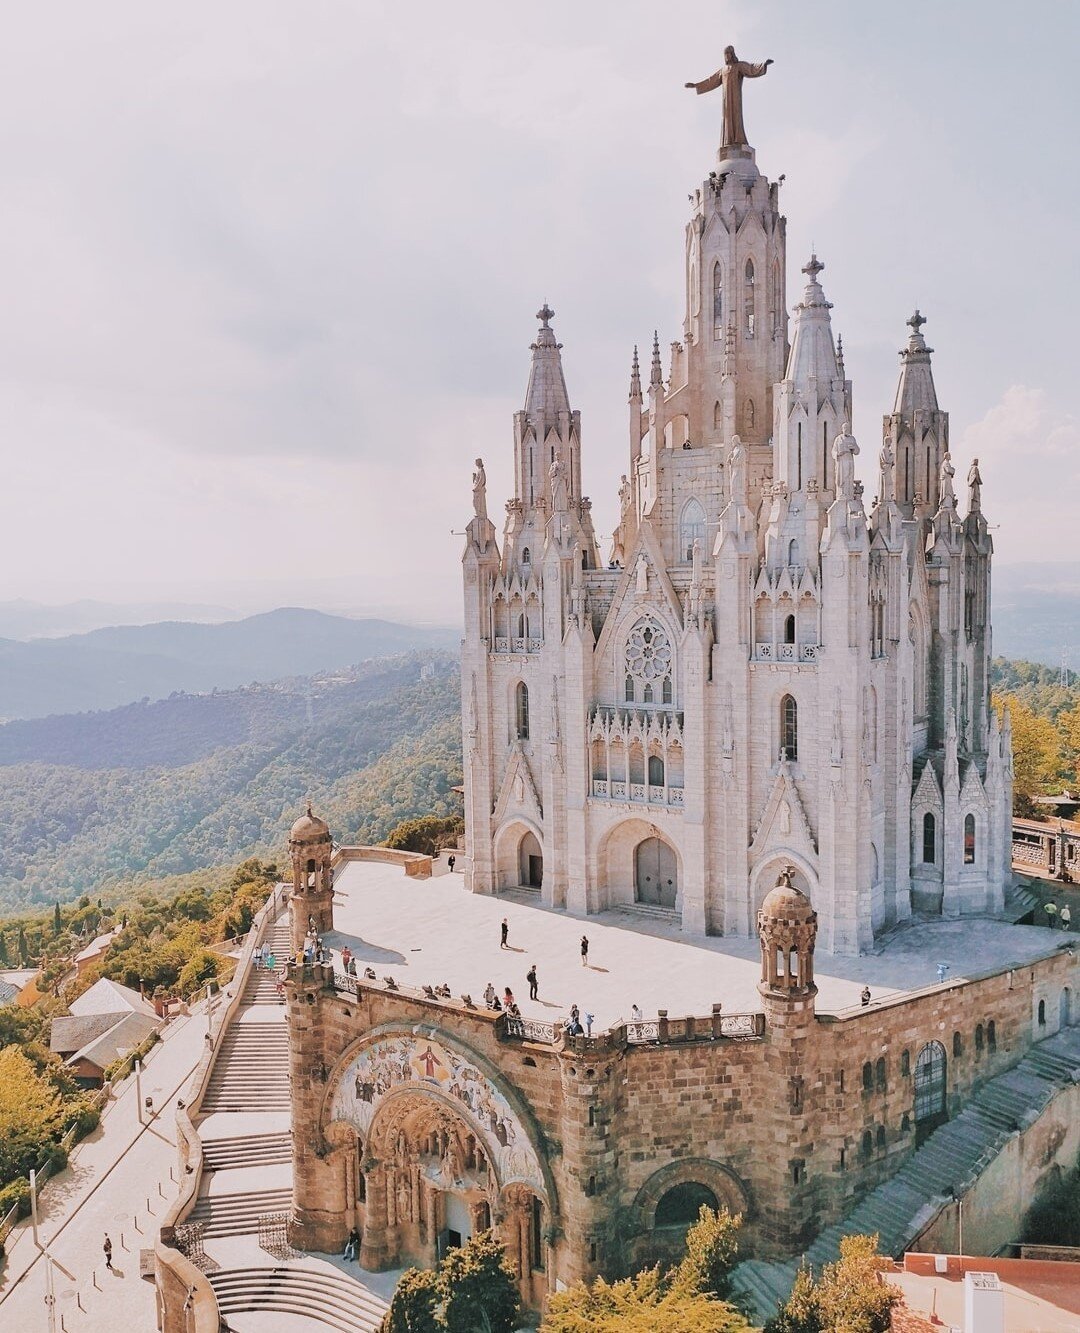 Have you been to Barcelona yet? I had the opportunity to visit back in 2015 and loved it!⁠
⁠
Here are  the top things I recommend seeing/doing while you&rsquo;re there if you&rsquo;re considering going for a family vacation.⁠
⁠
*  Food Tour to sample